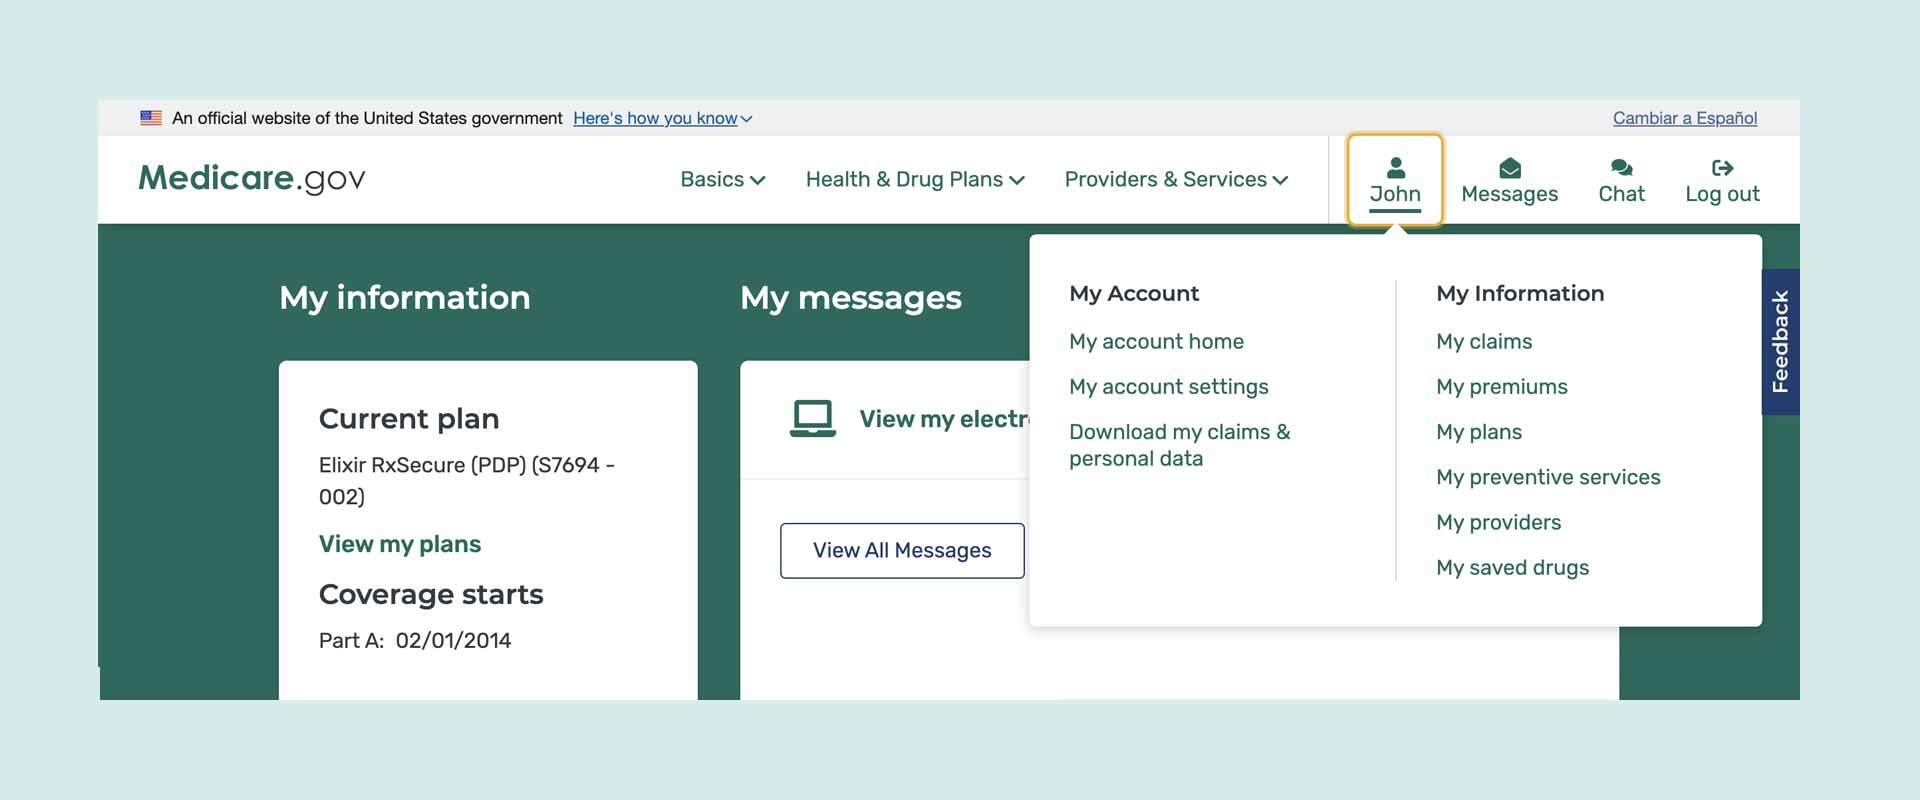 A person signed into Medicare.gov sees a screen with two boxes showing their personal medical information and messages related to their Medicare experience.